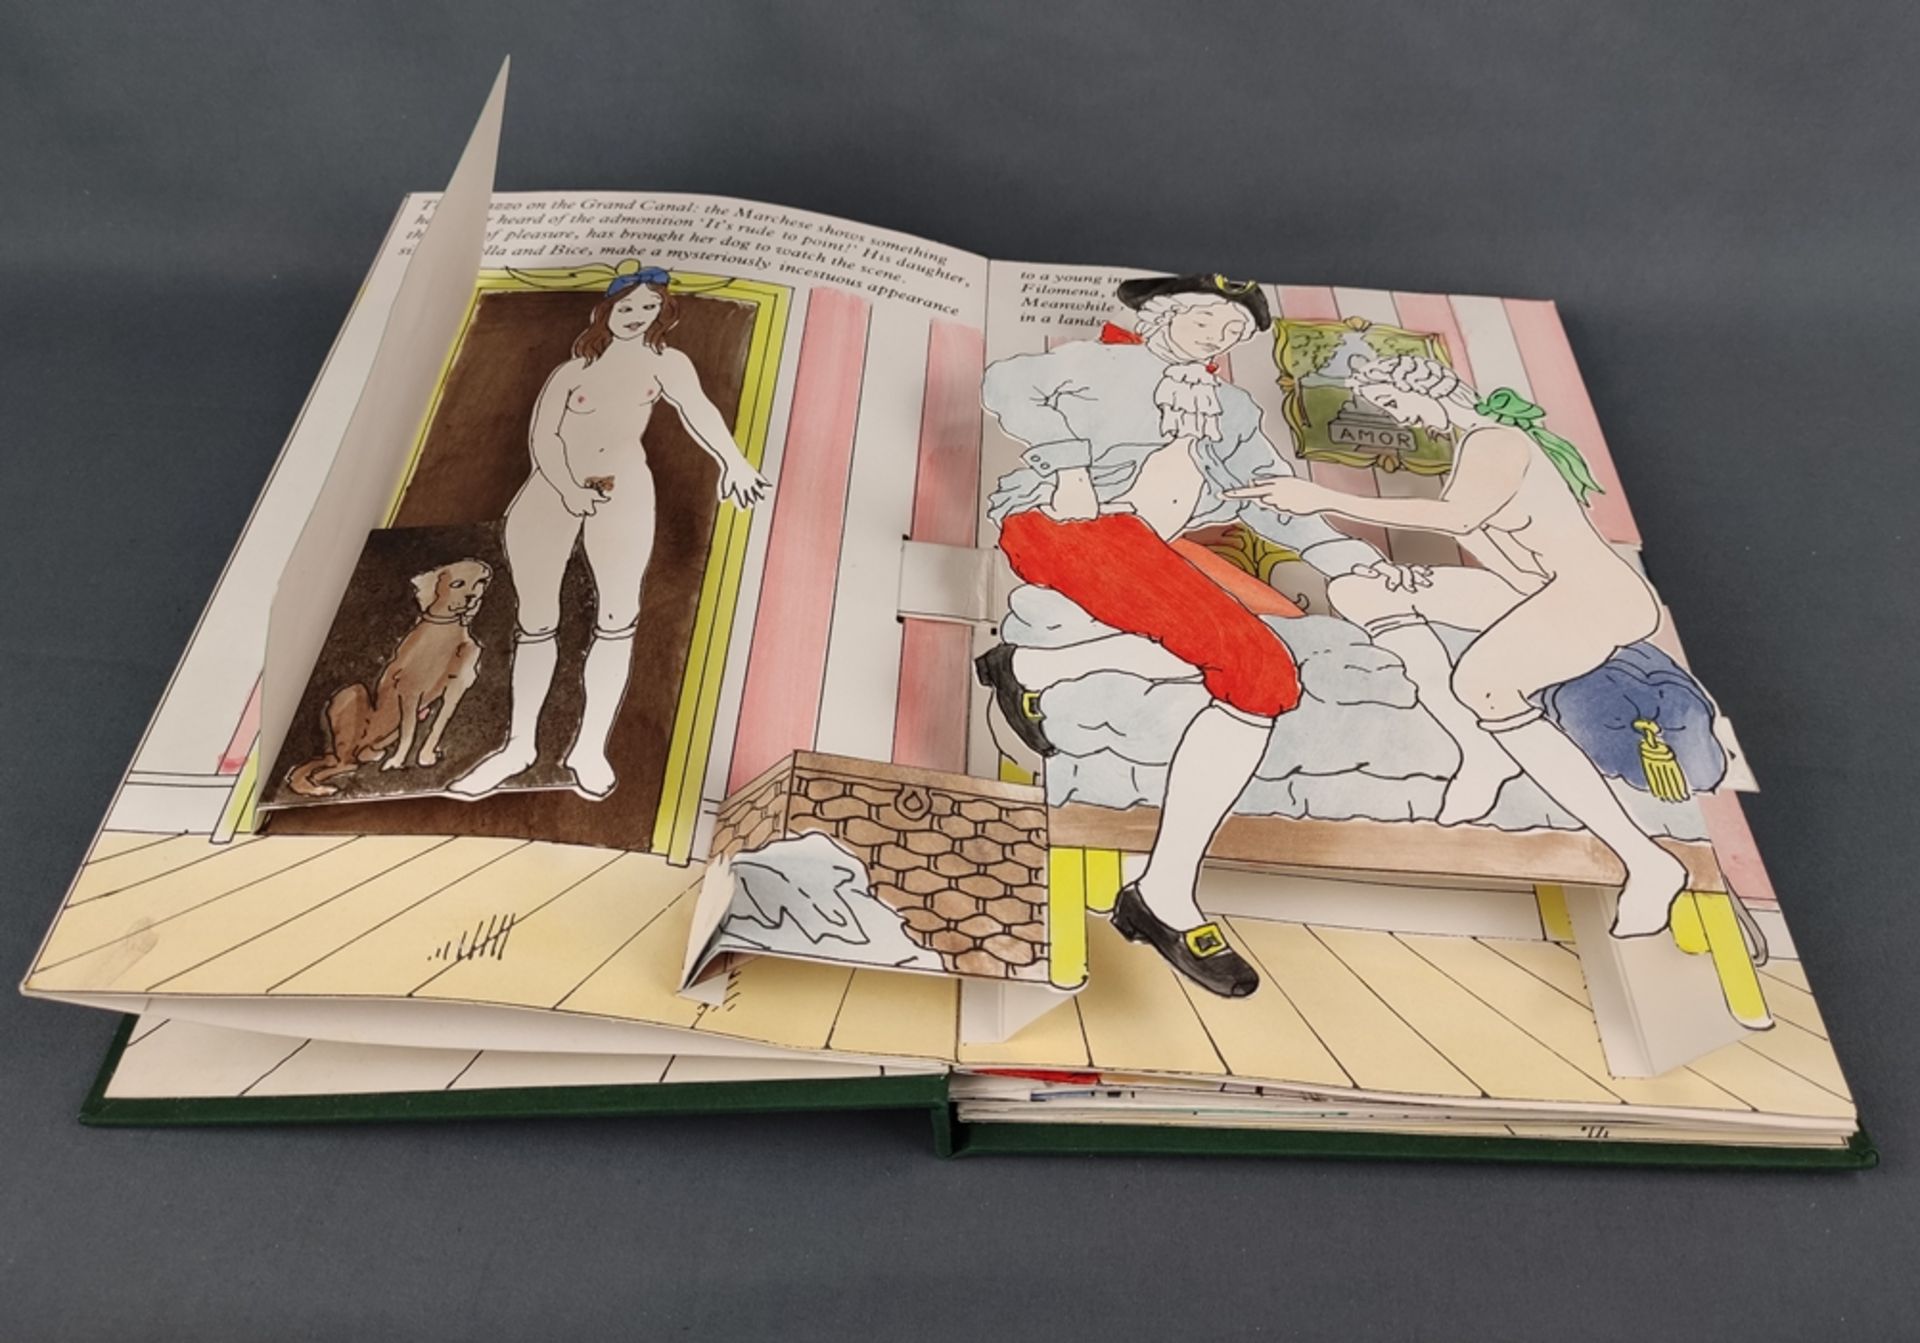 Erotica: Russel, David (20th/21st century) "The Secret Carnival", pop-up book, intricately crafted, - Image 3 of 4